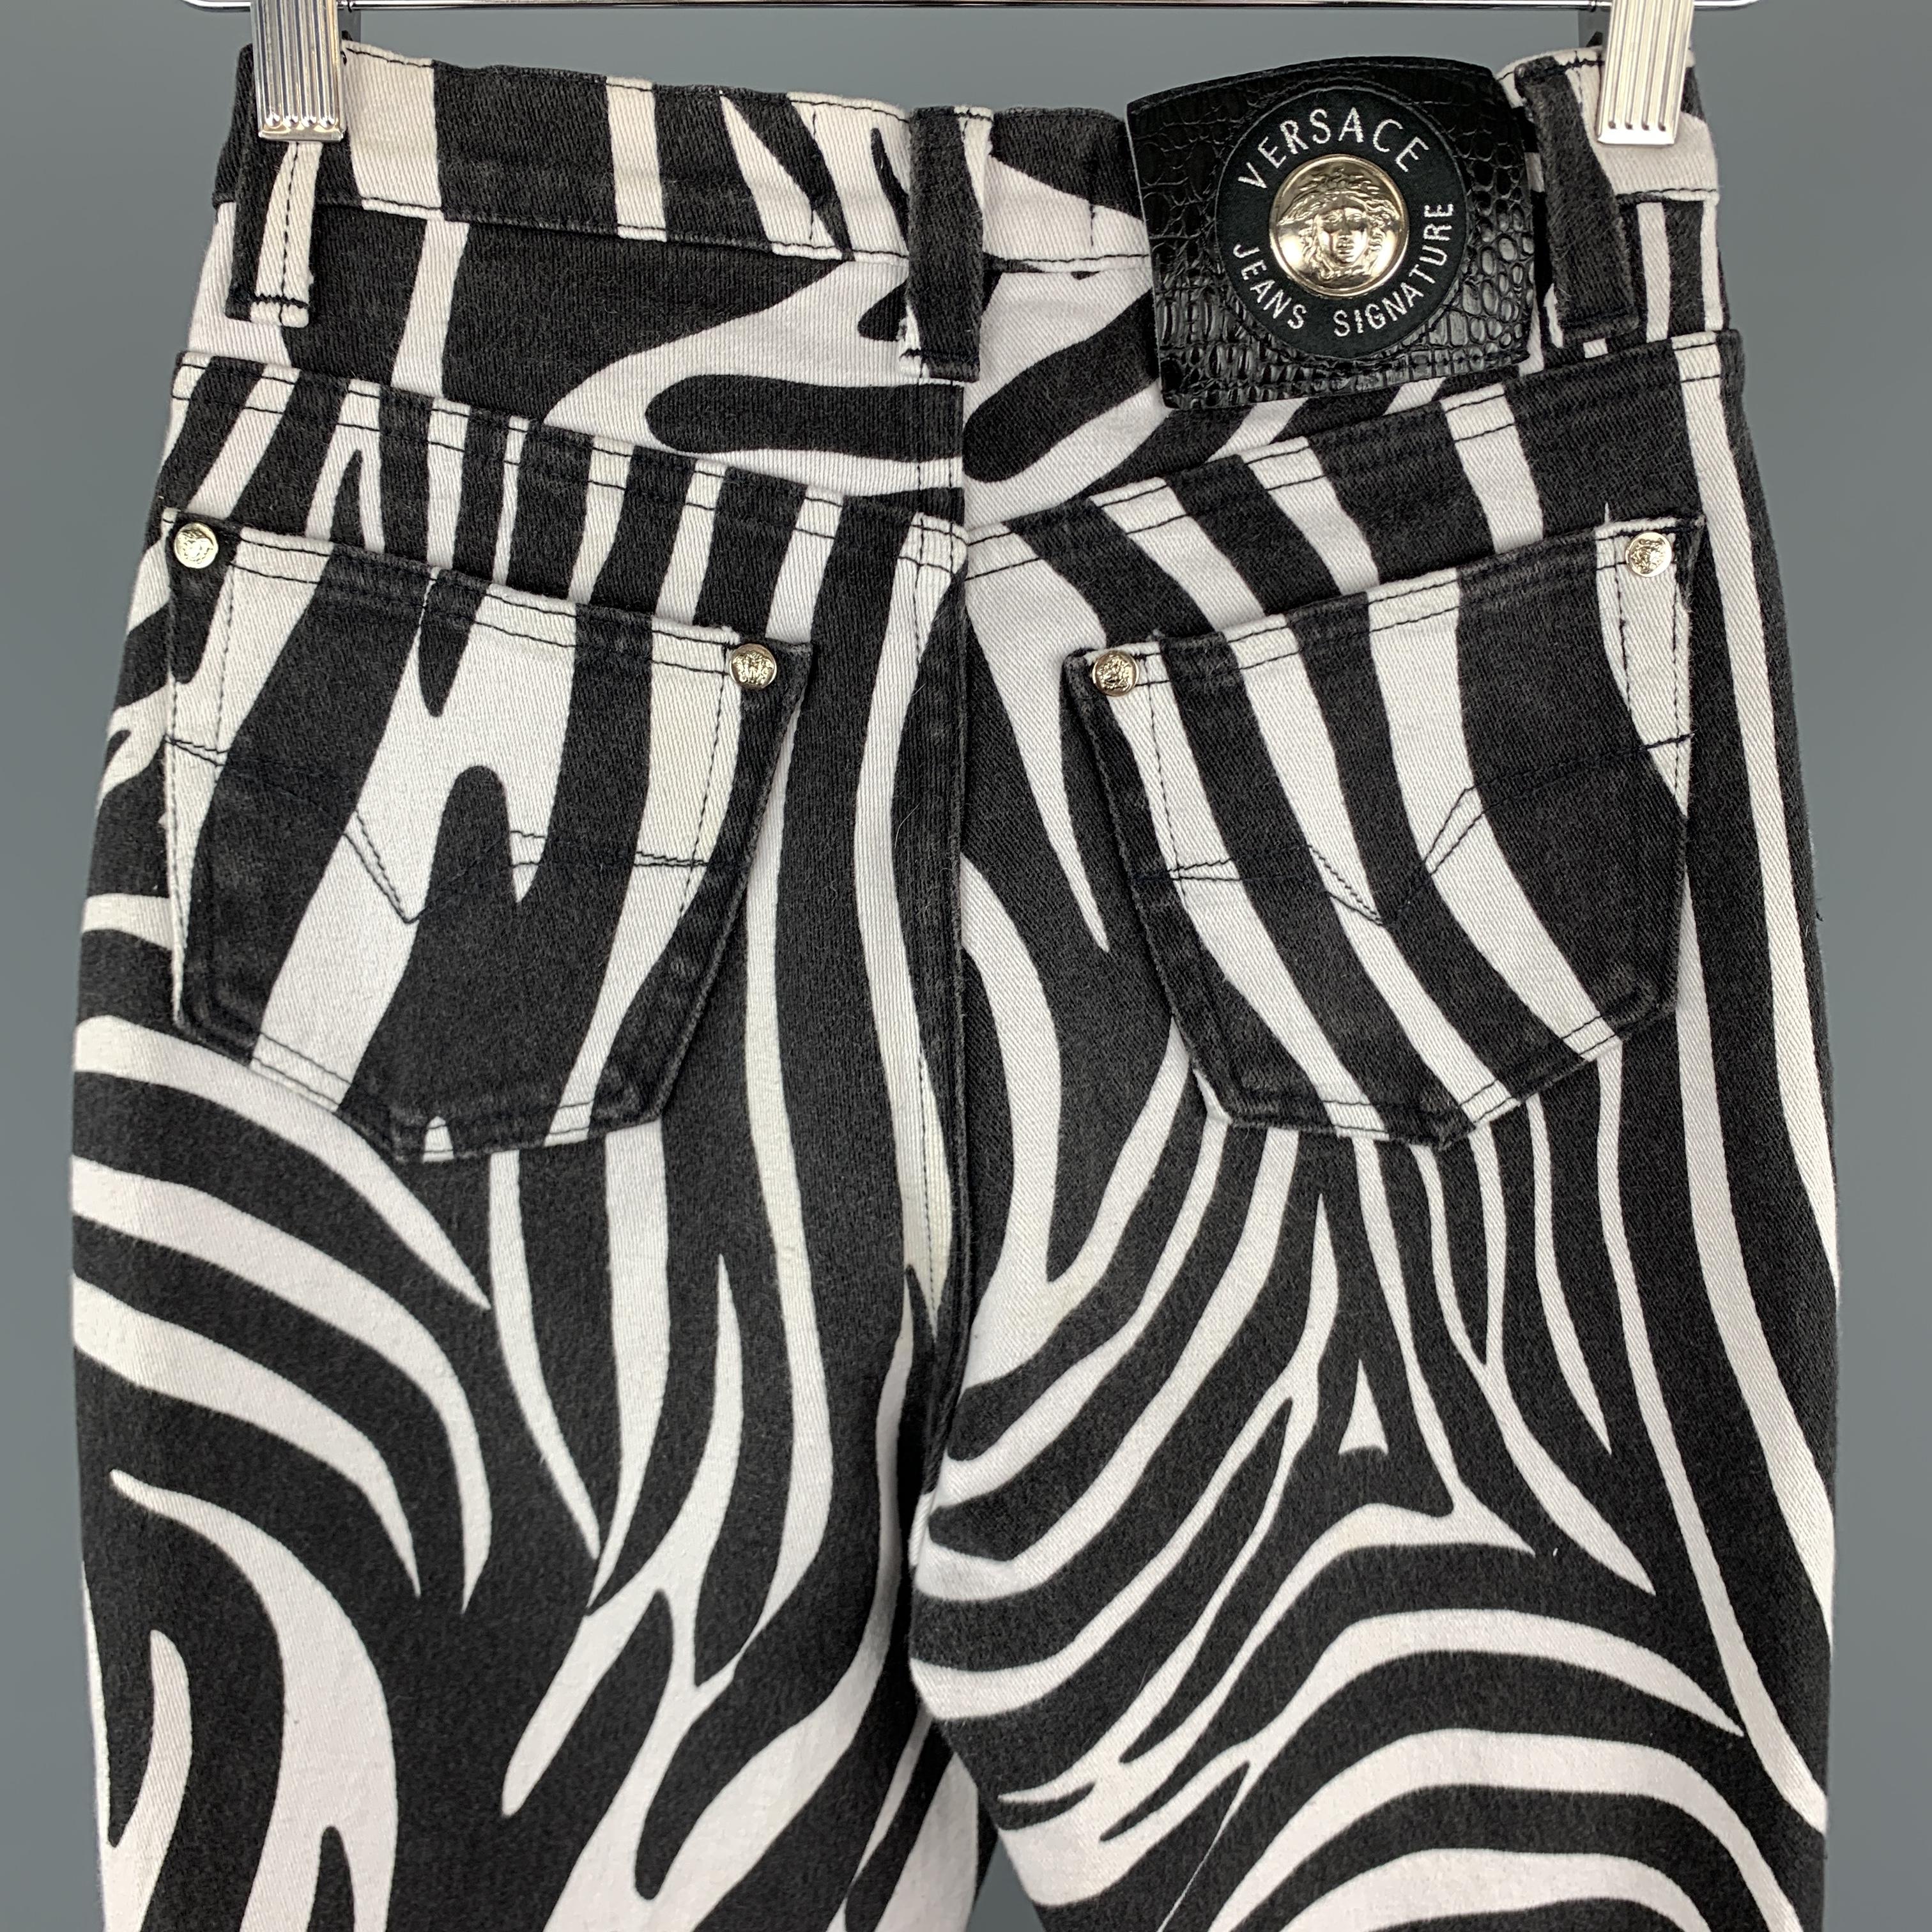 VERSACE JEANS SIGNATURE Size 28 Black & White Zebra Print High Rise Jeans In Good Condition In San Francisco, CA